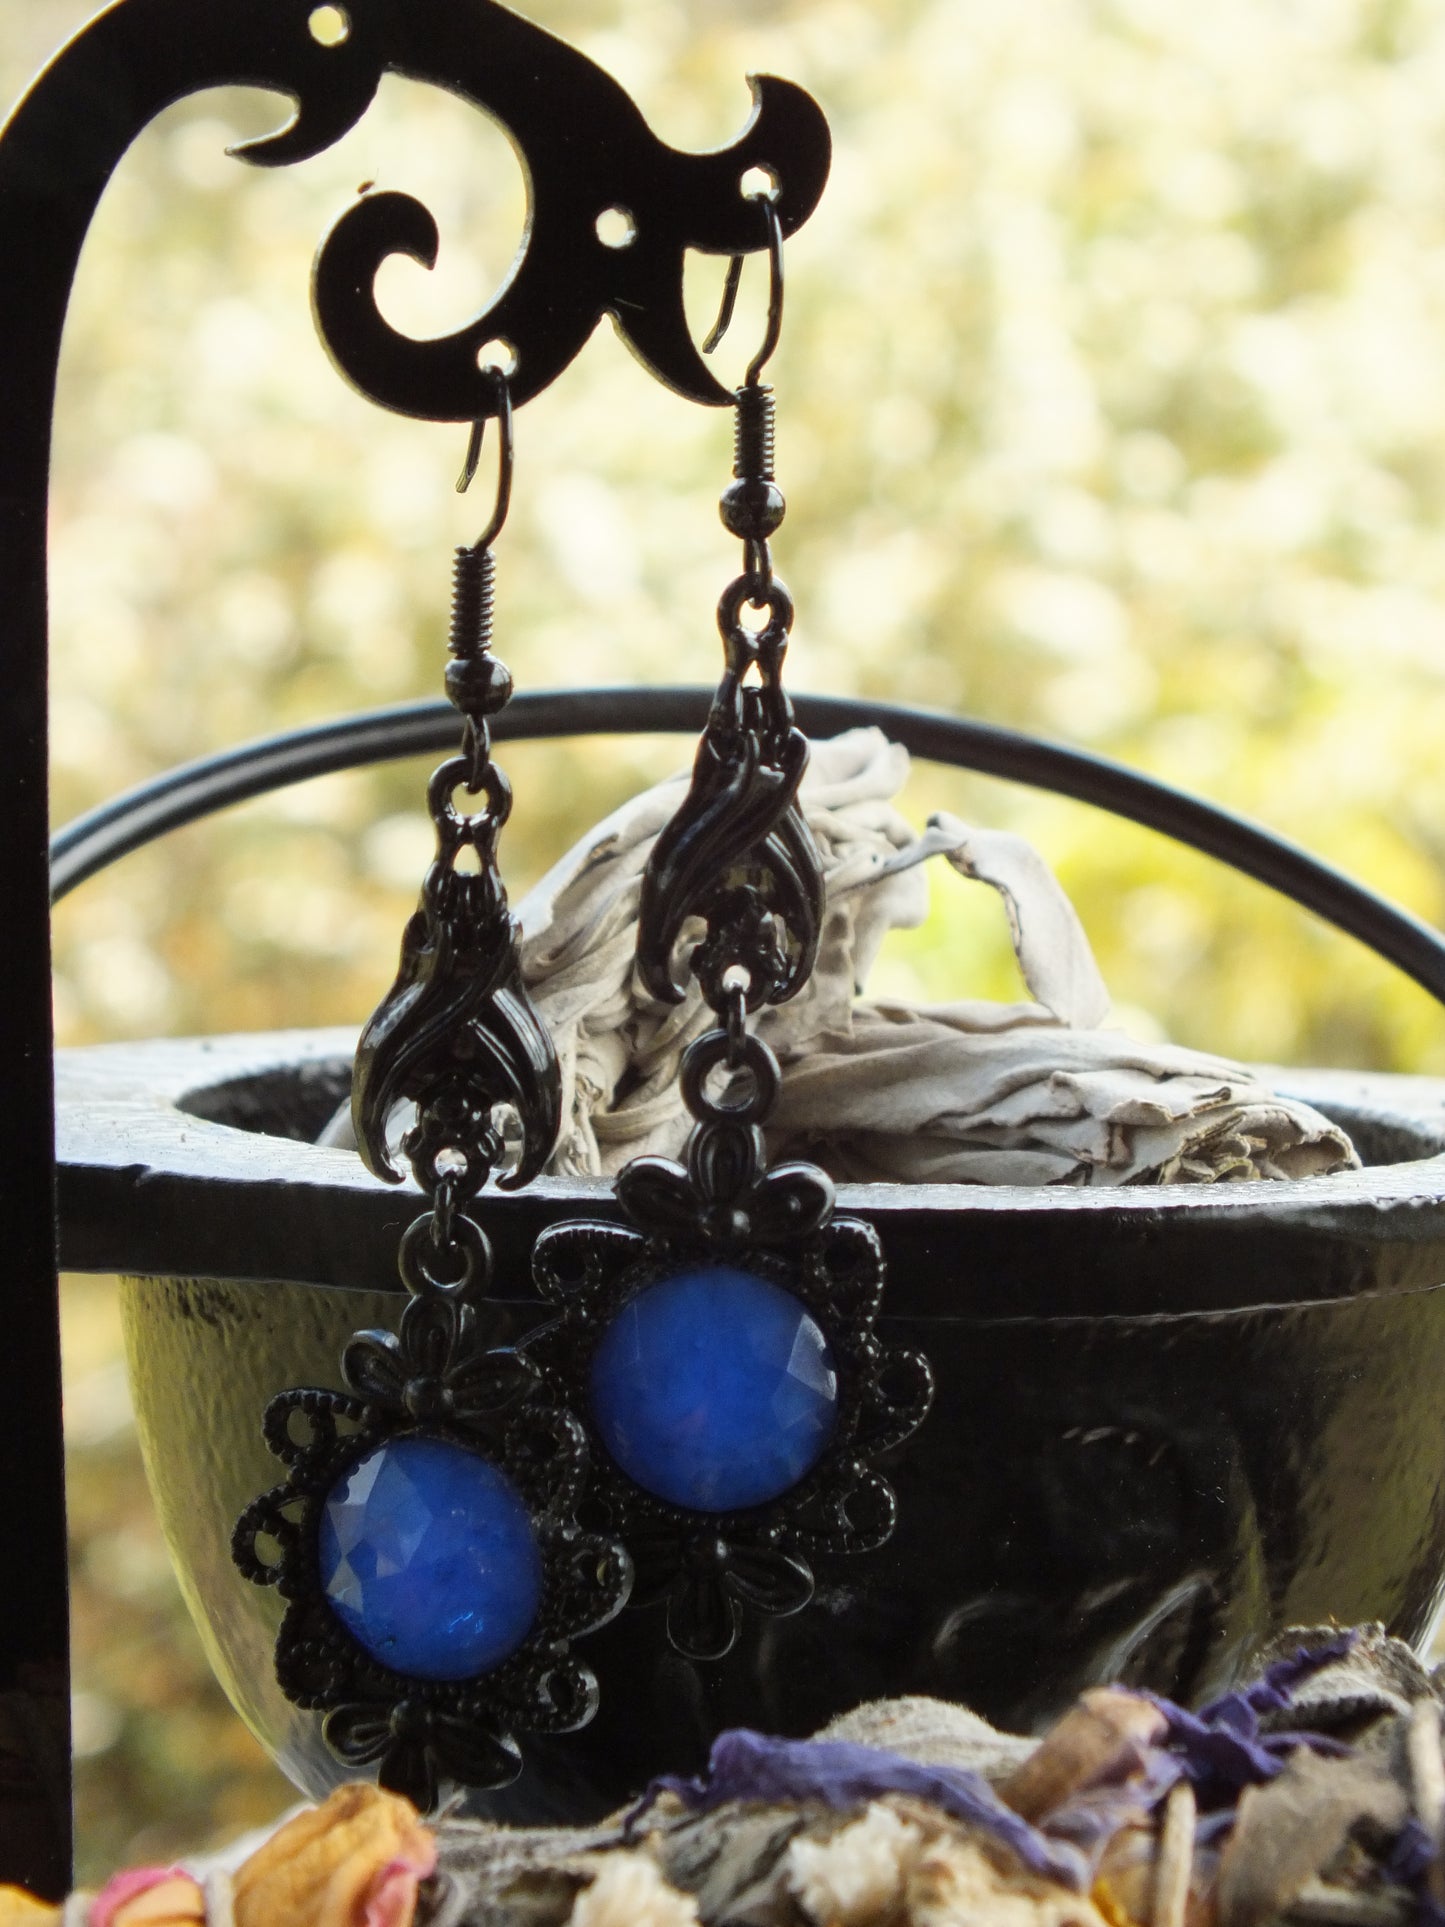 Gothic Costume Earrings With Bats Electric Blue